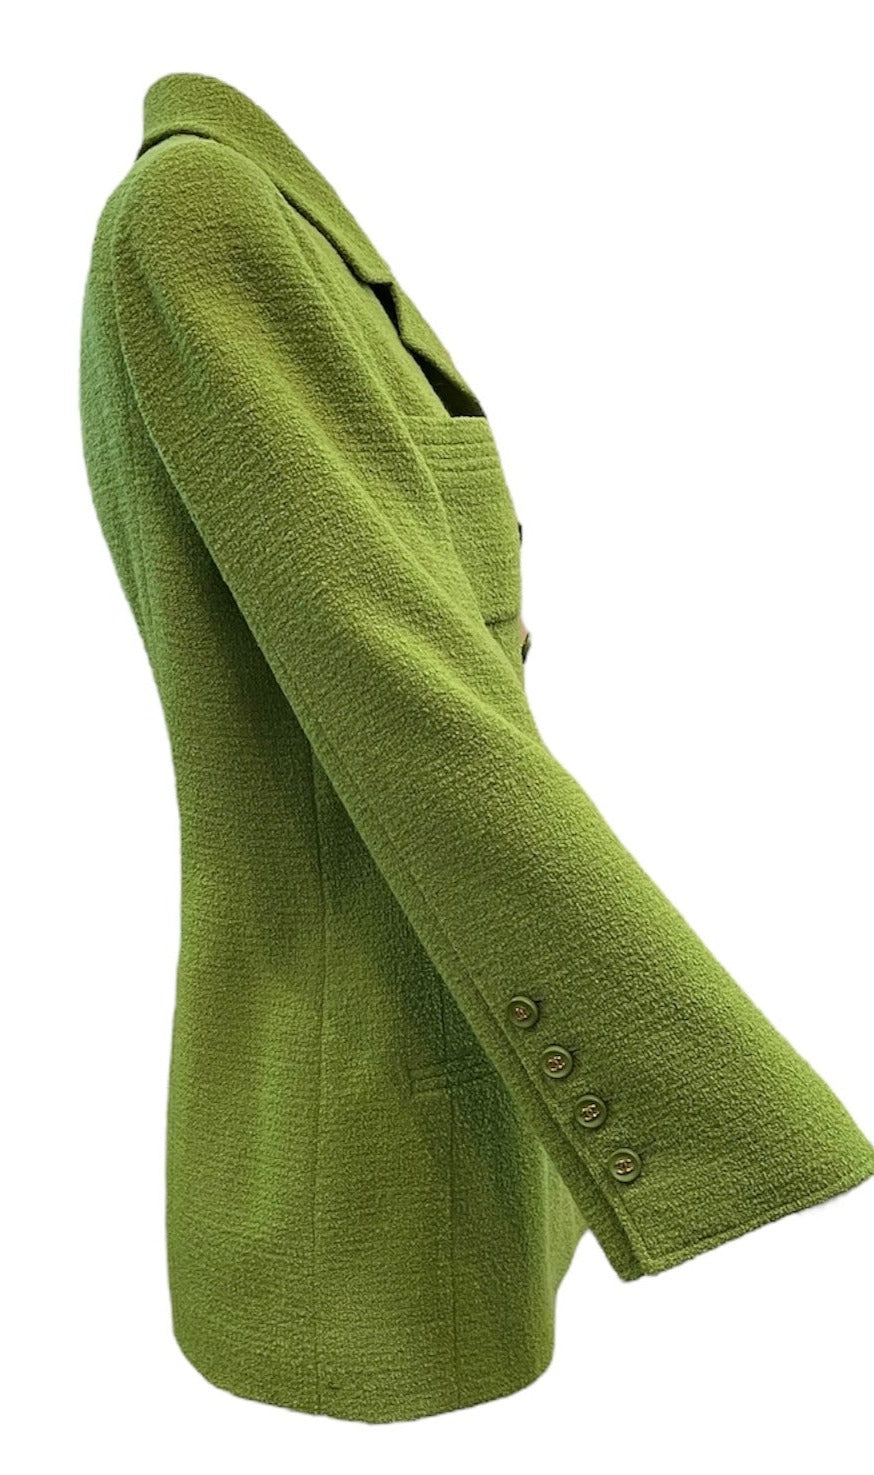   Chanel 90s Lime Green Wool Jacket with Silk Lining SIDE 2 of 6